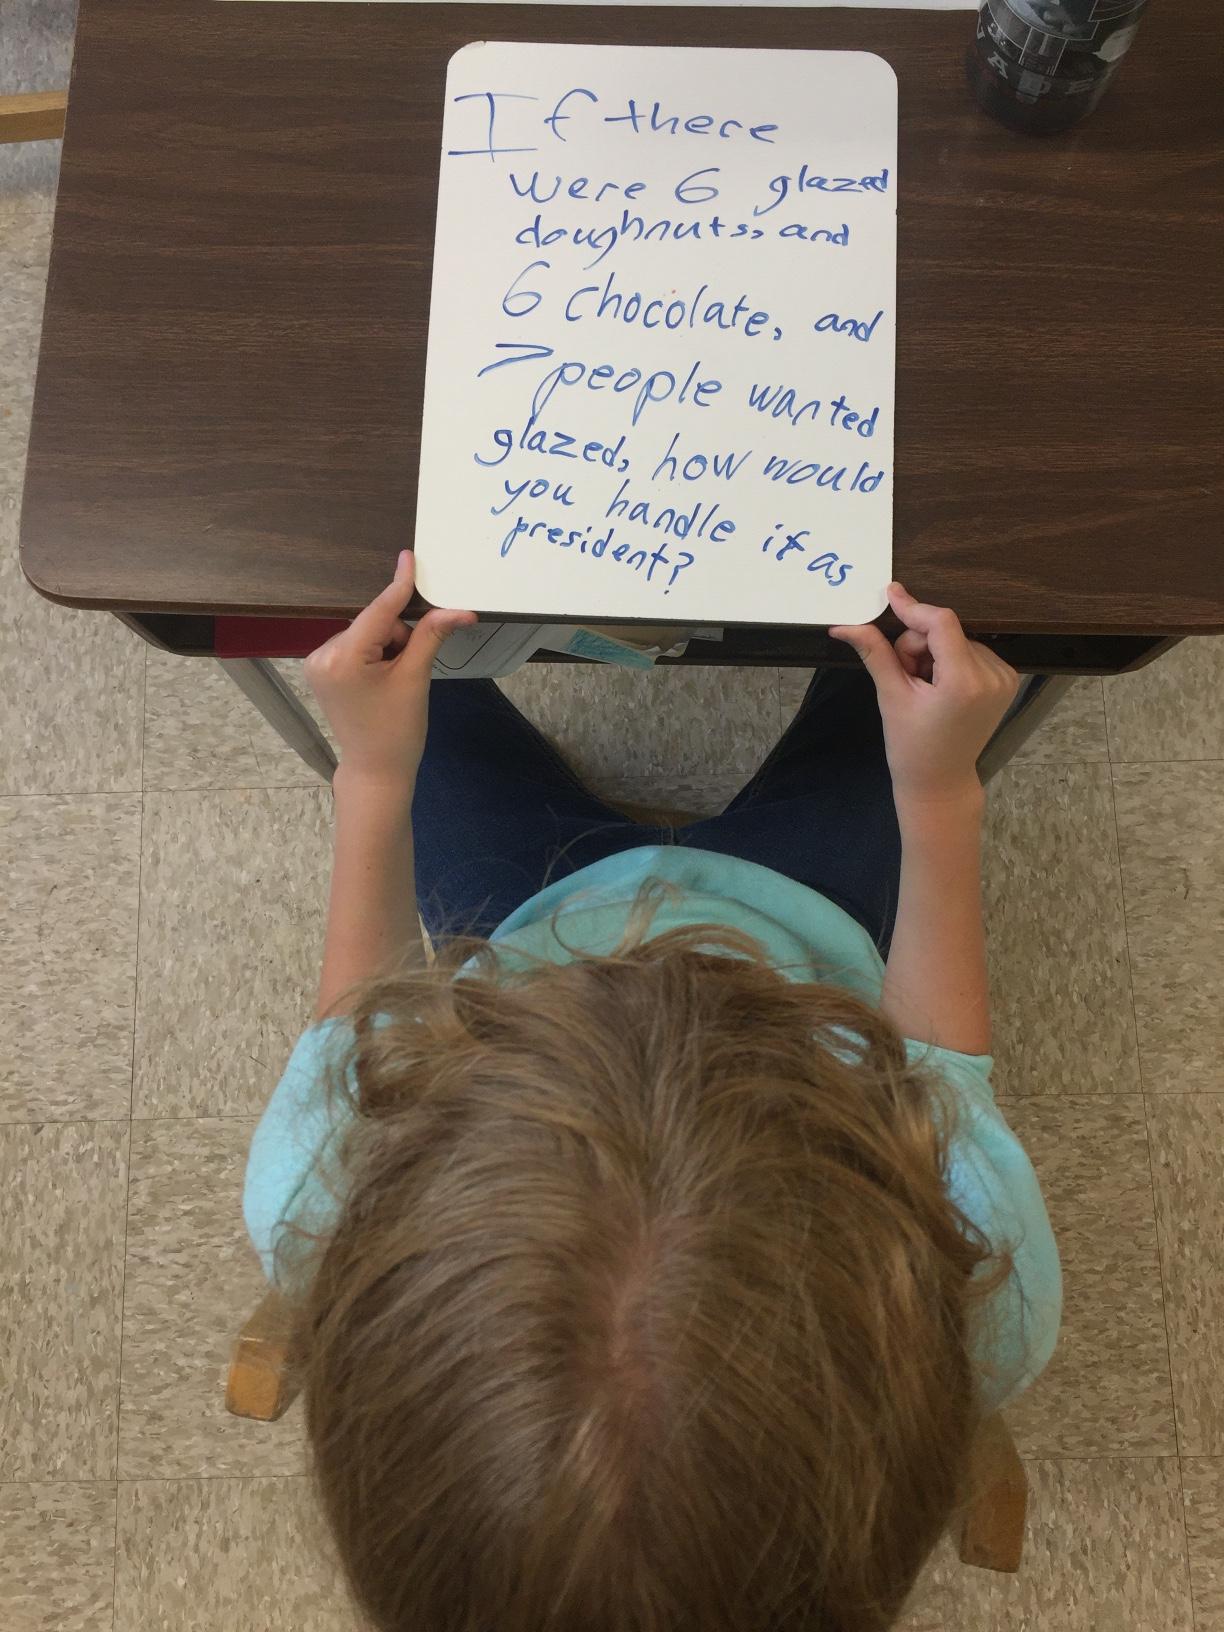 Lily, a second grader at the Circle School in San Antonio, looks down at her prepared question for her class president candidates.